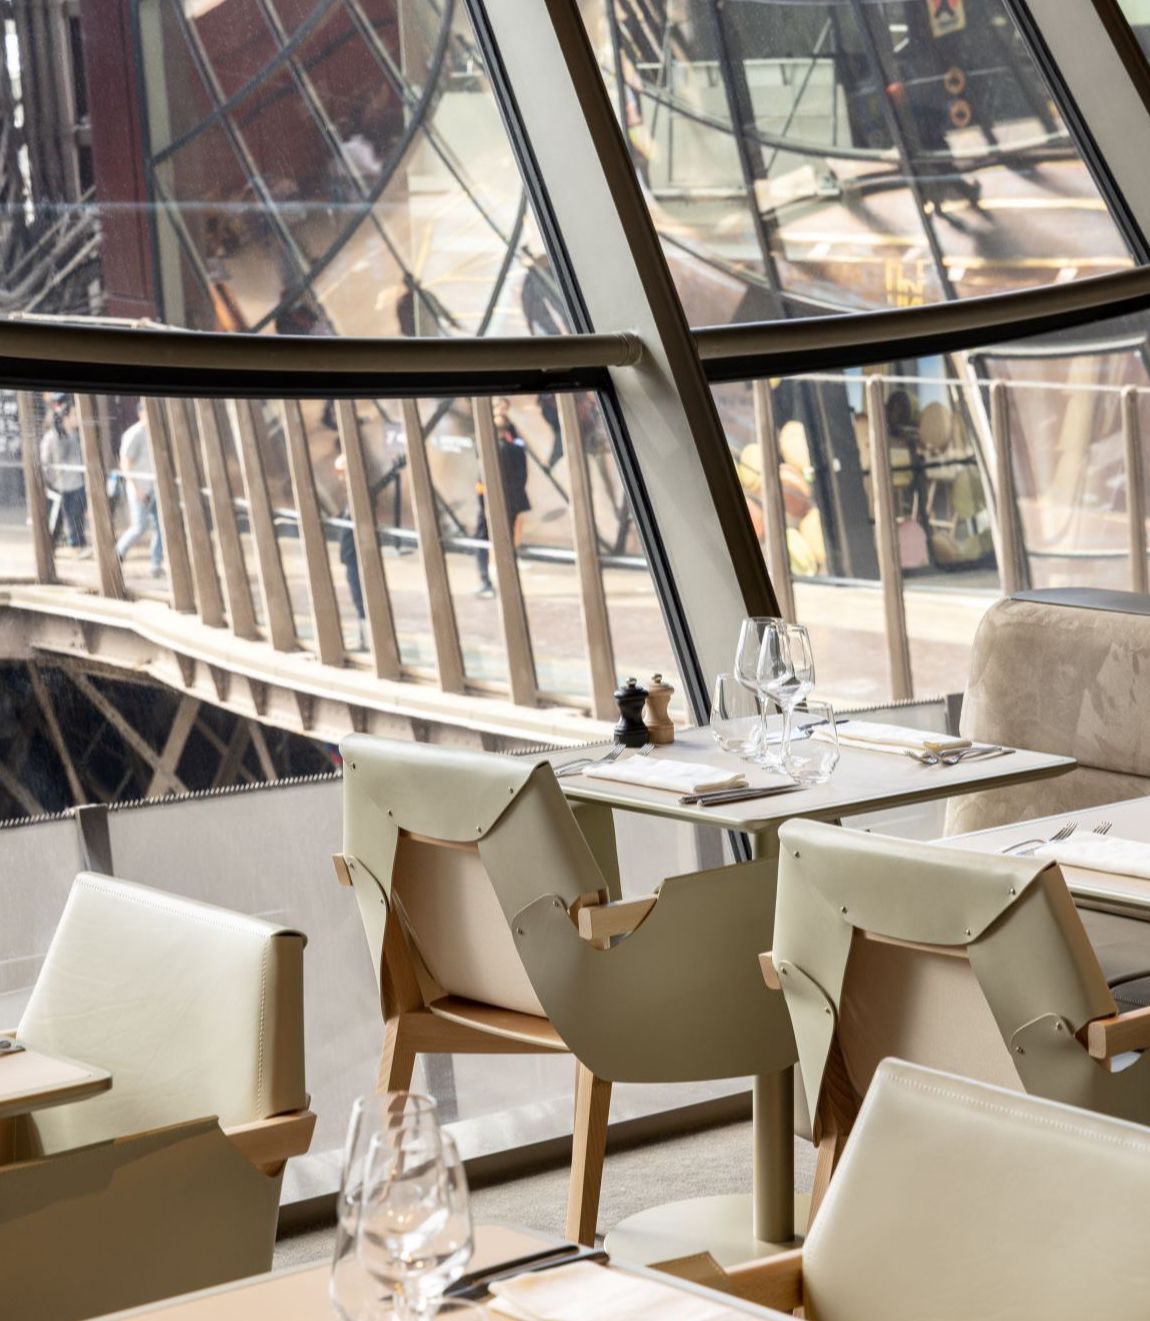 Lunch at the Eiffel tower restaurant "Madame Brasserie" (Priority access)